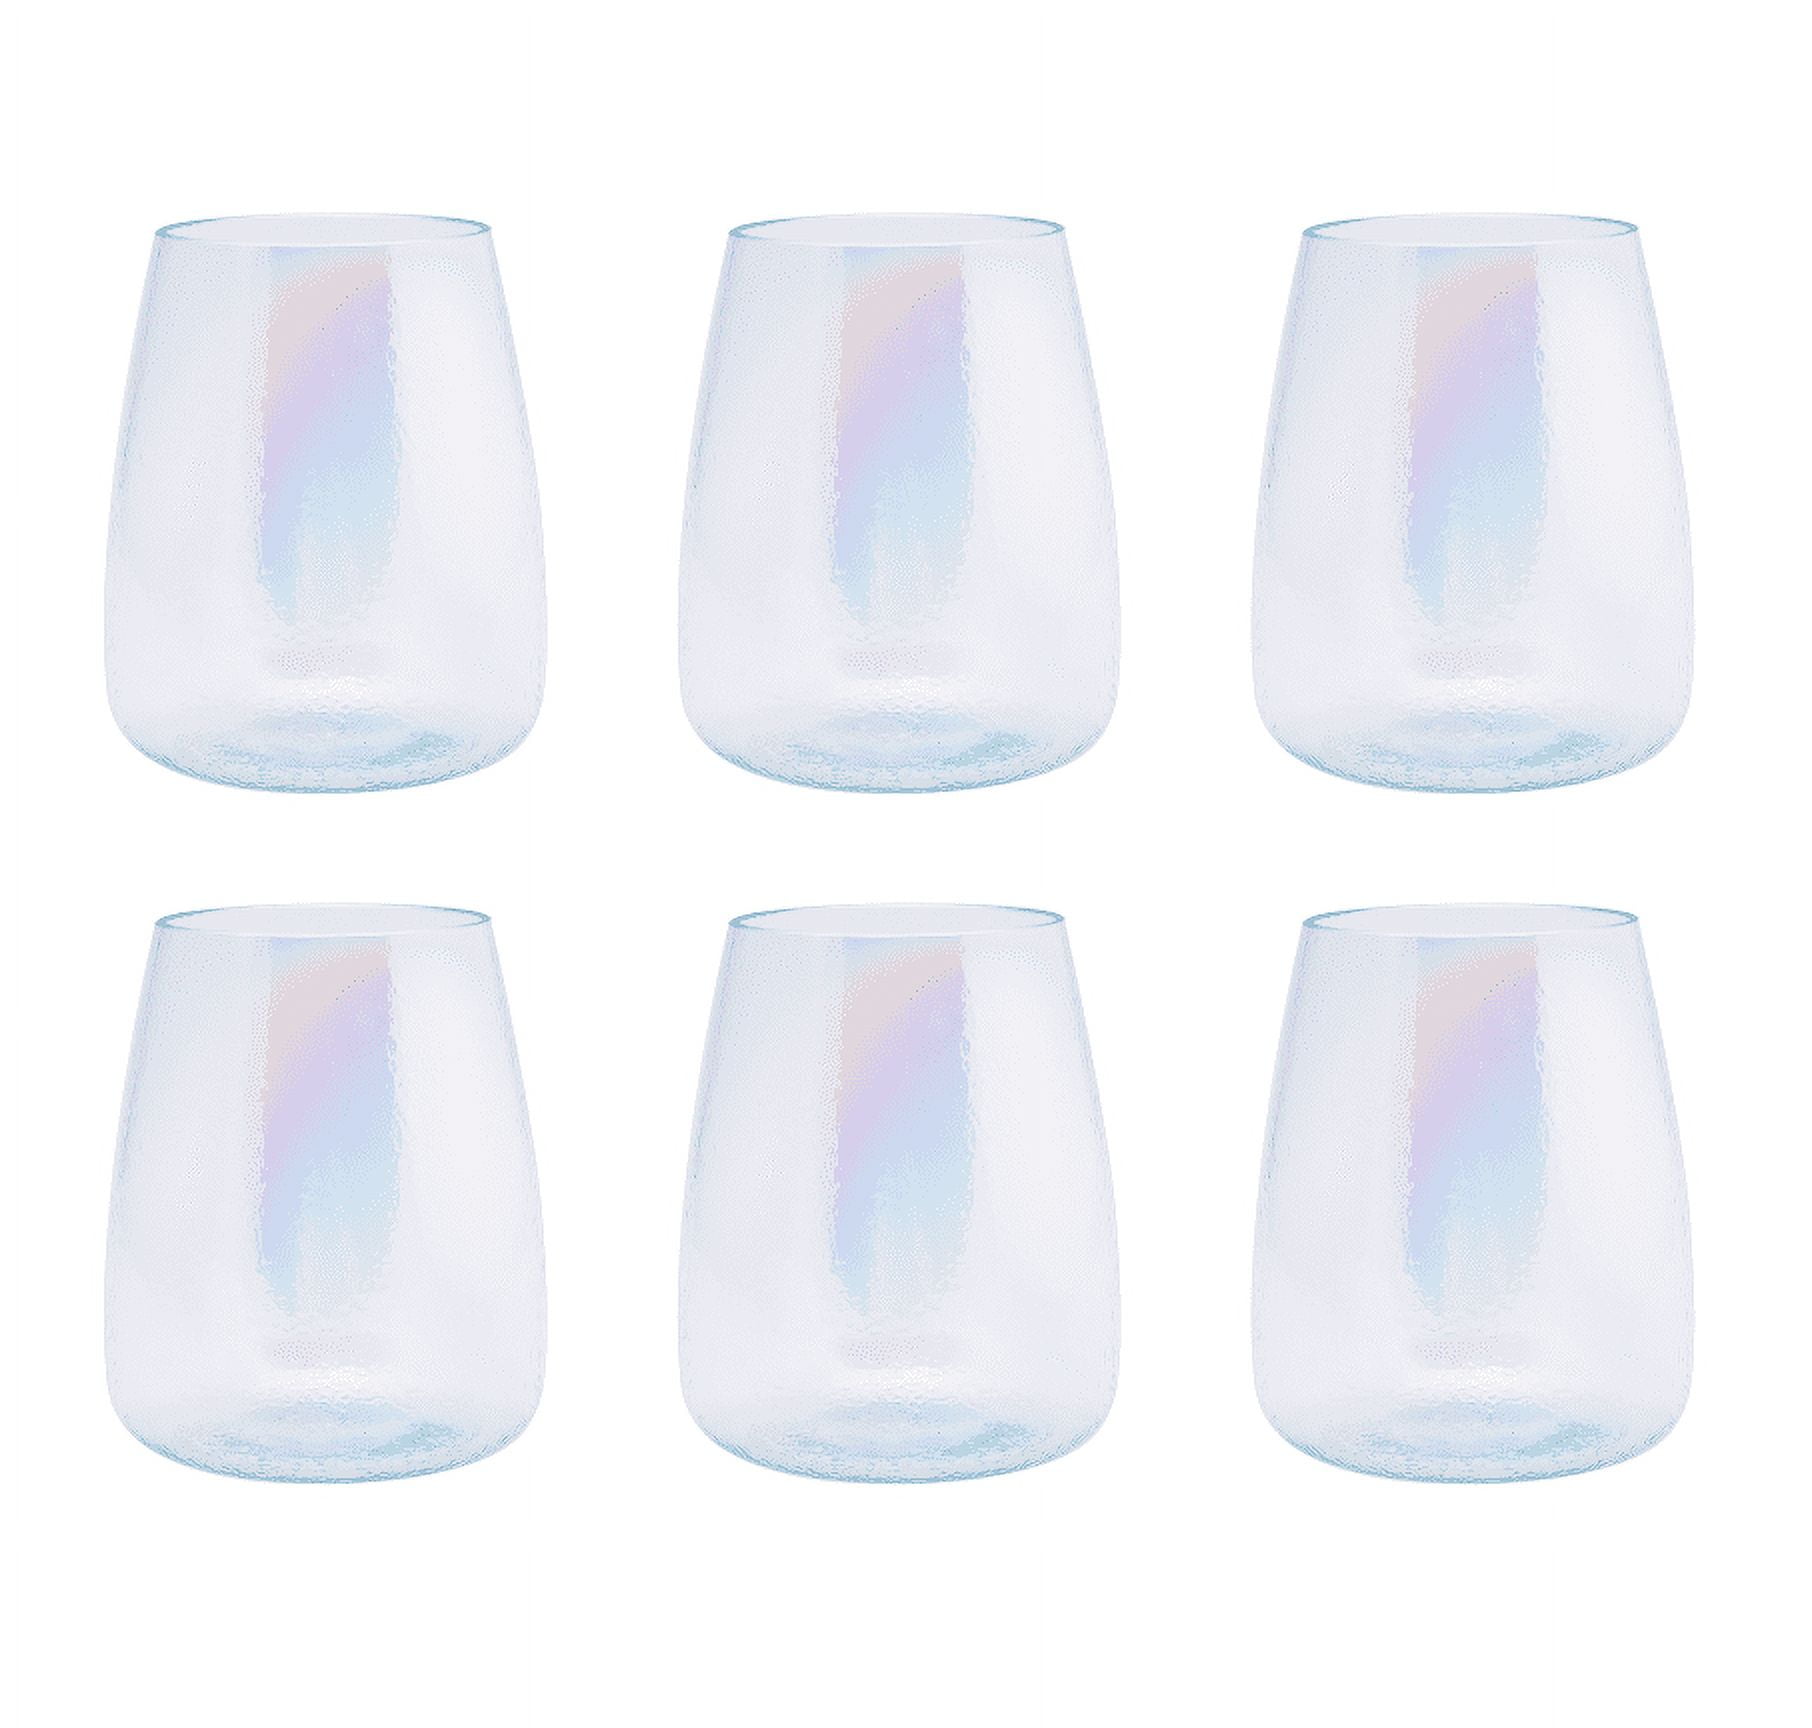 Iridescent stemless wine glasses set of 2/4/6 Unique Cute Gift